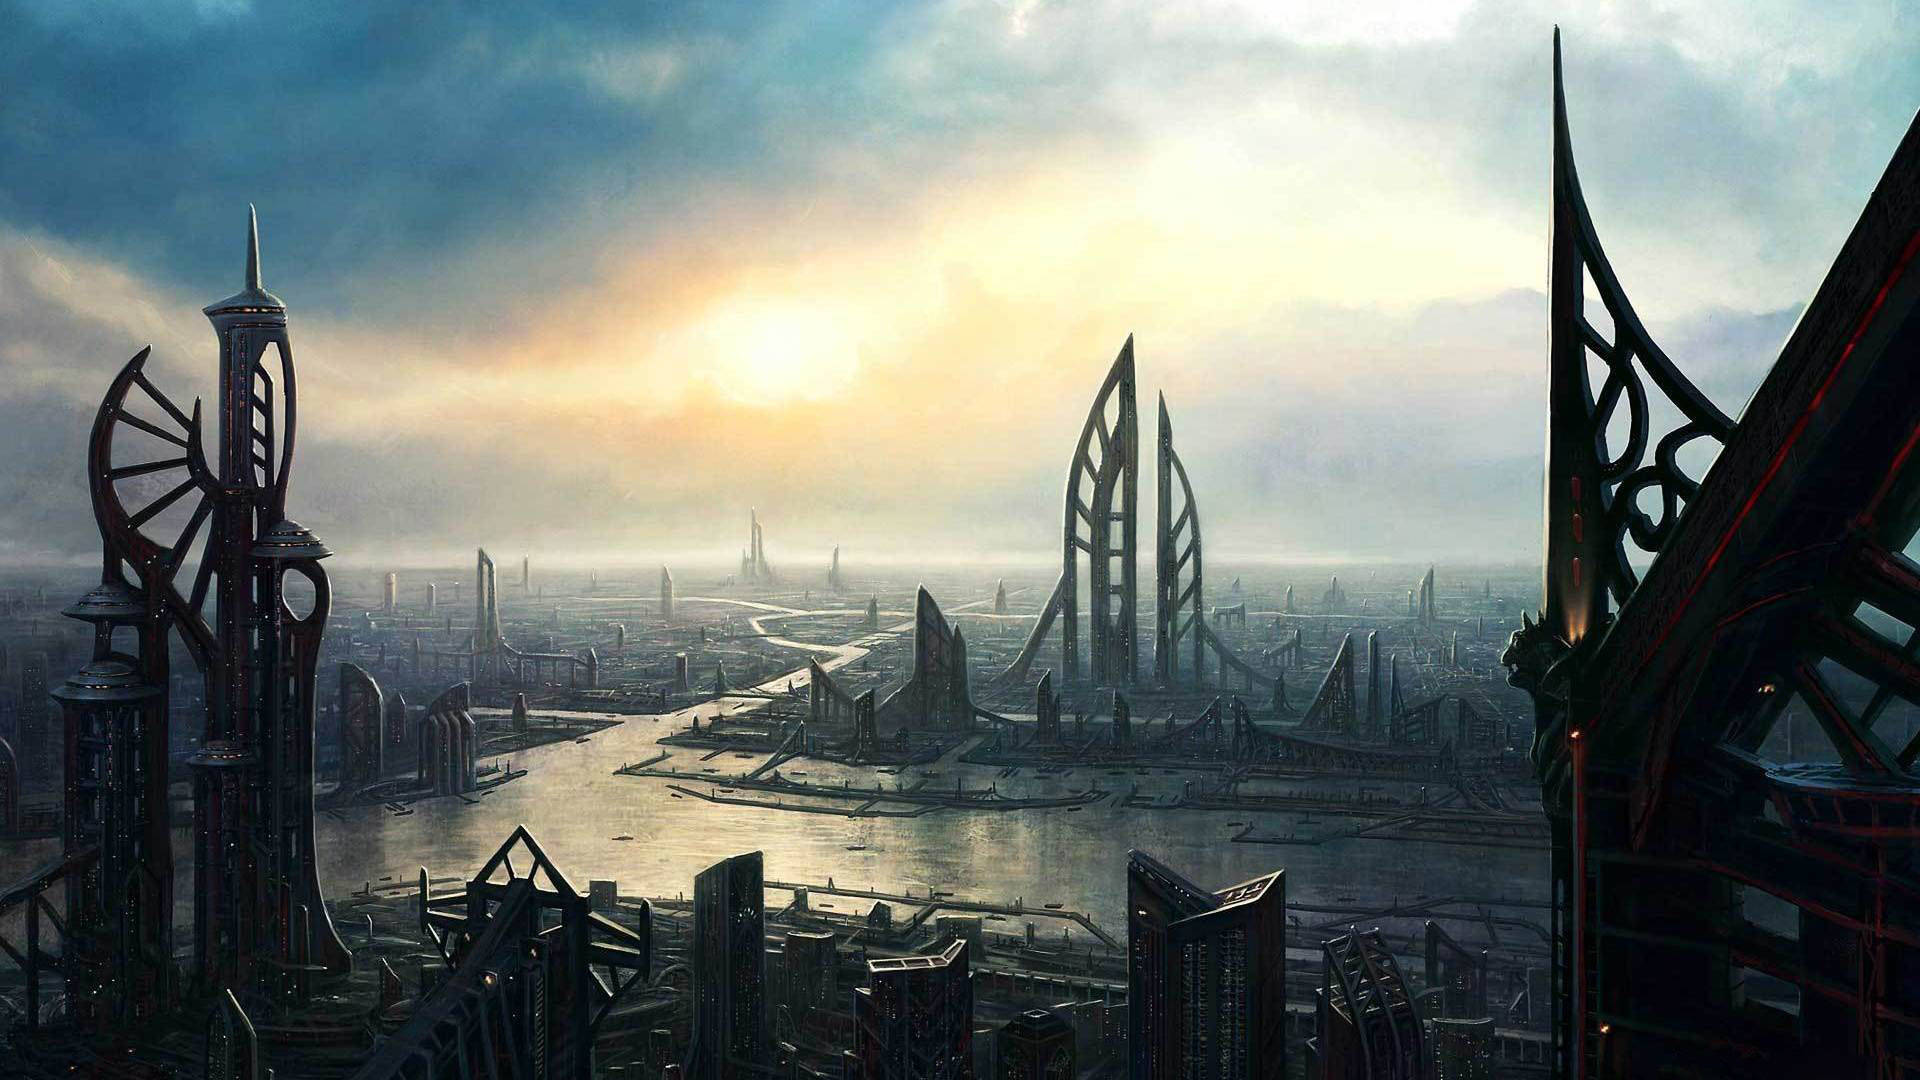 Fantastical City Art With Towers Background